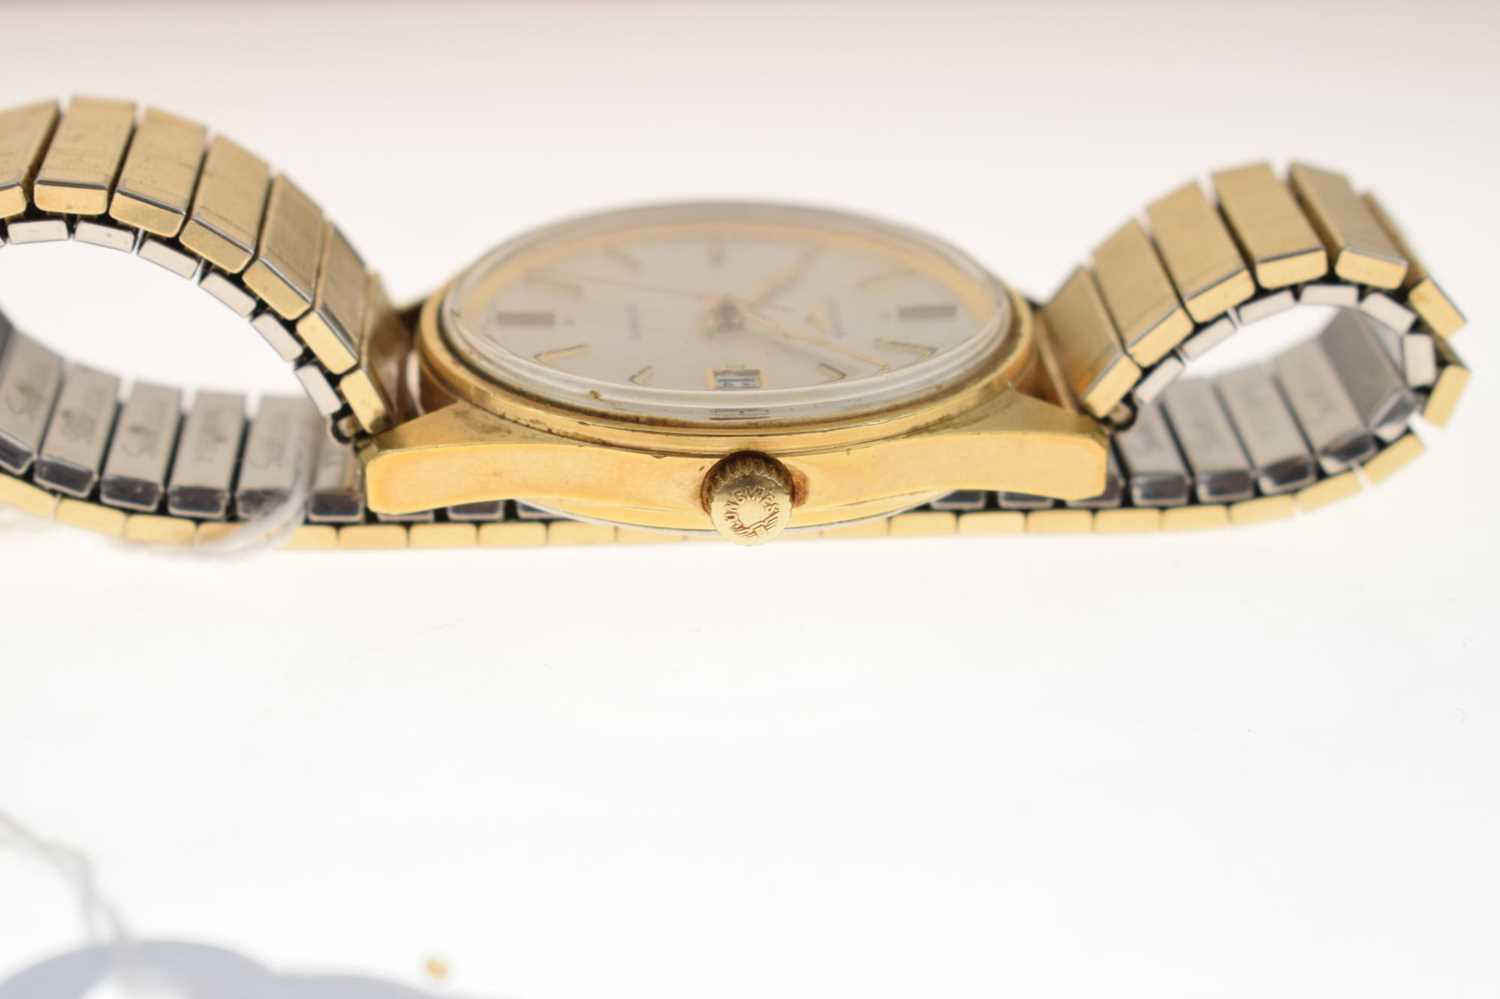 Longines - Gentleman's gold plated automatic bracelet watch - Image 4 of 8